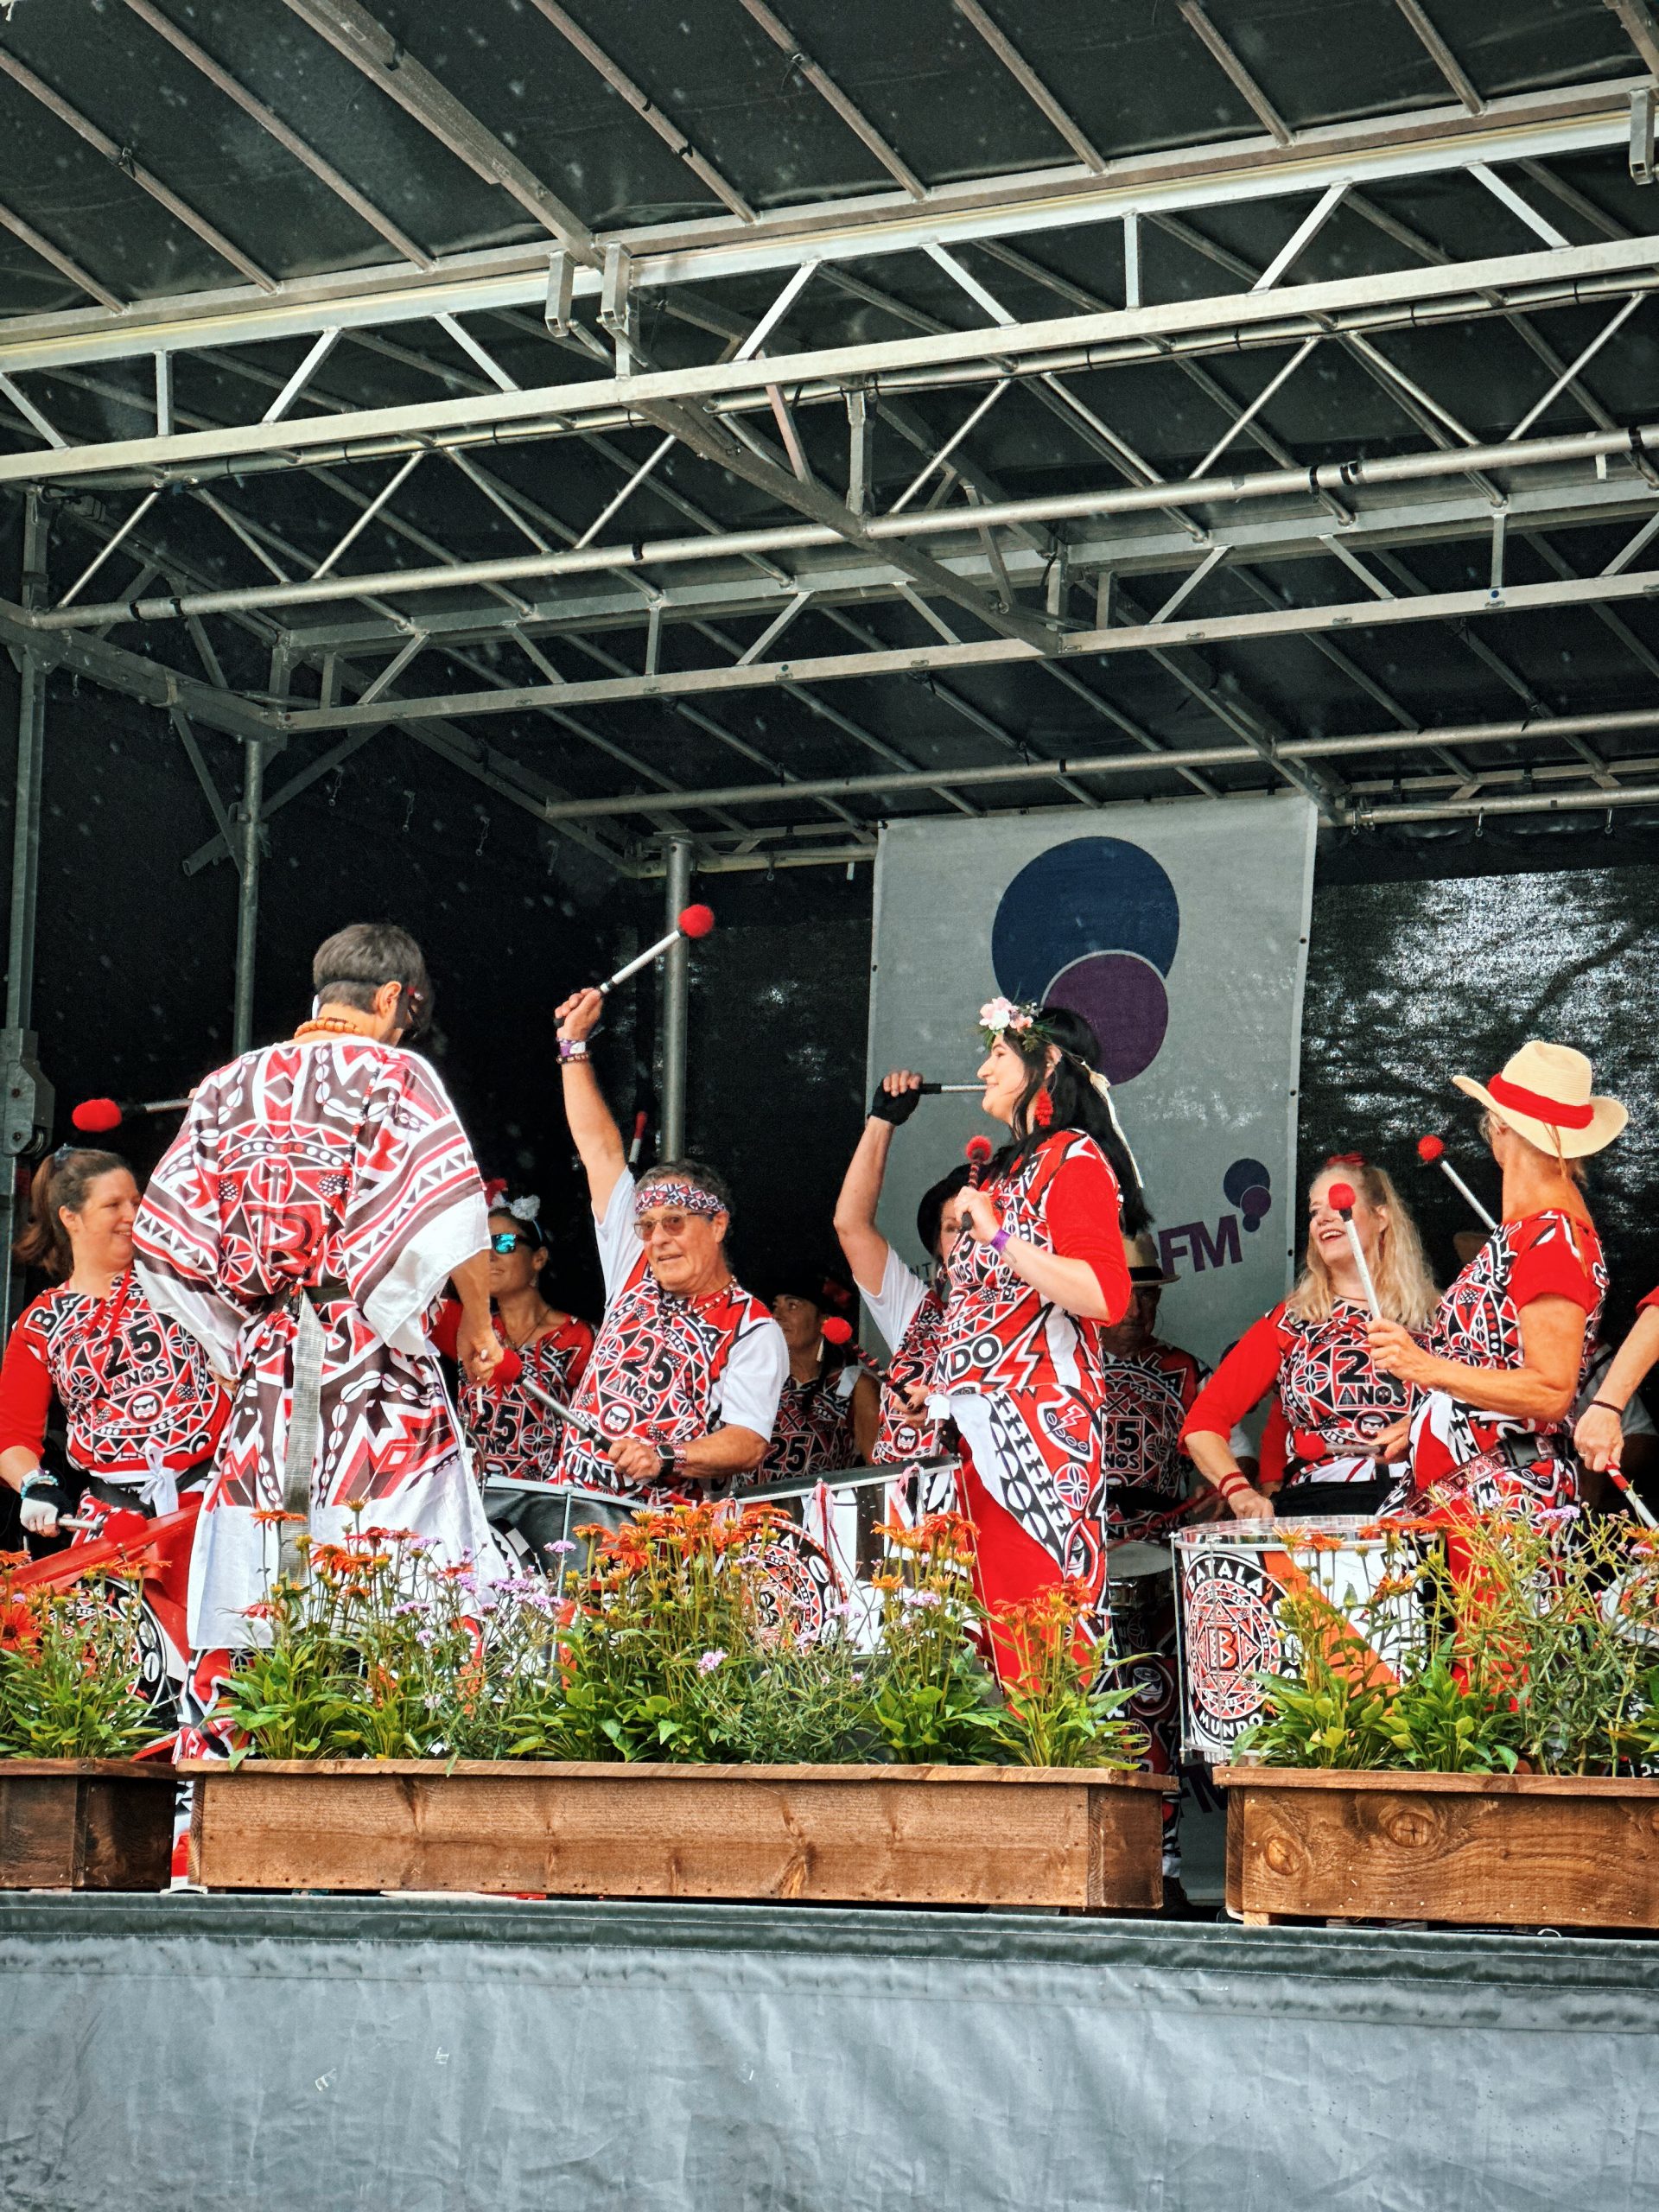 Batala performing on the ToneFM stage at Taunton Flower Show